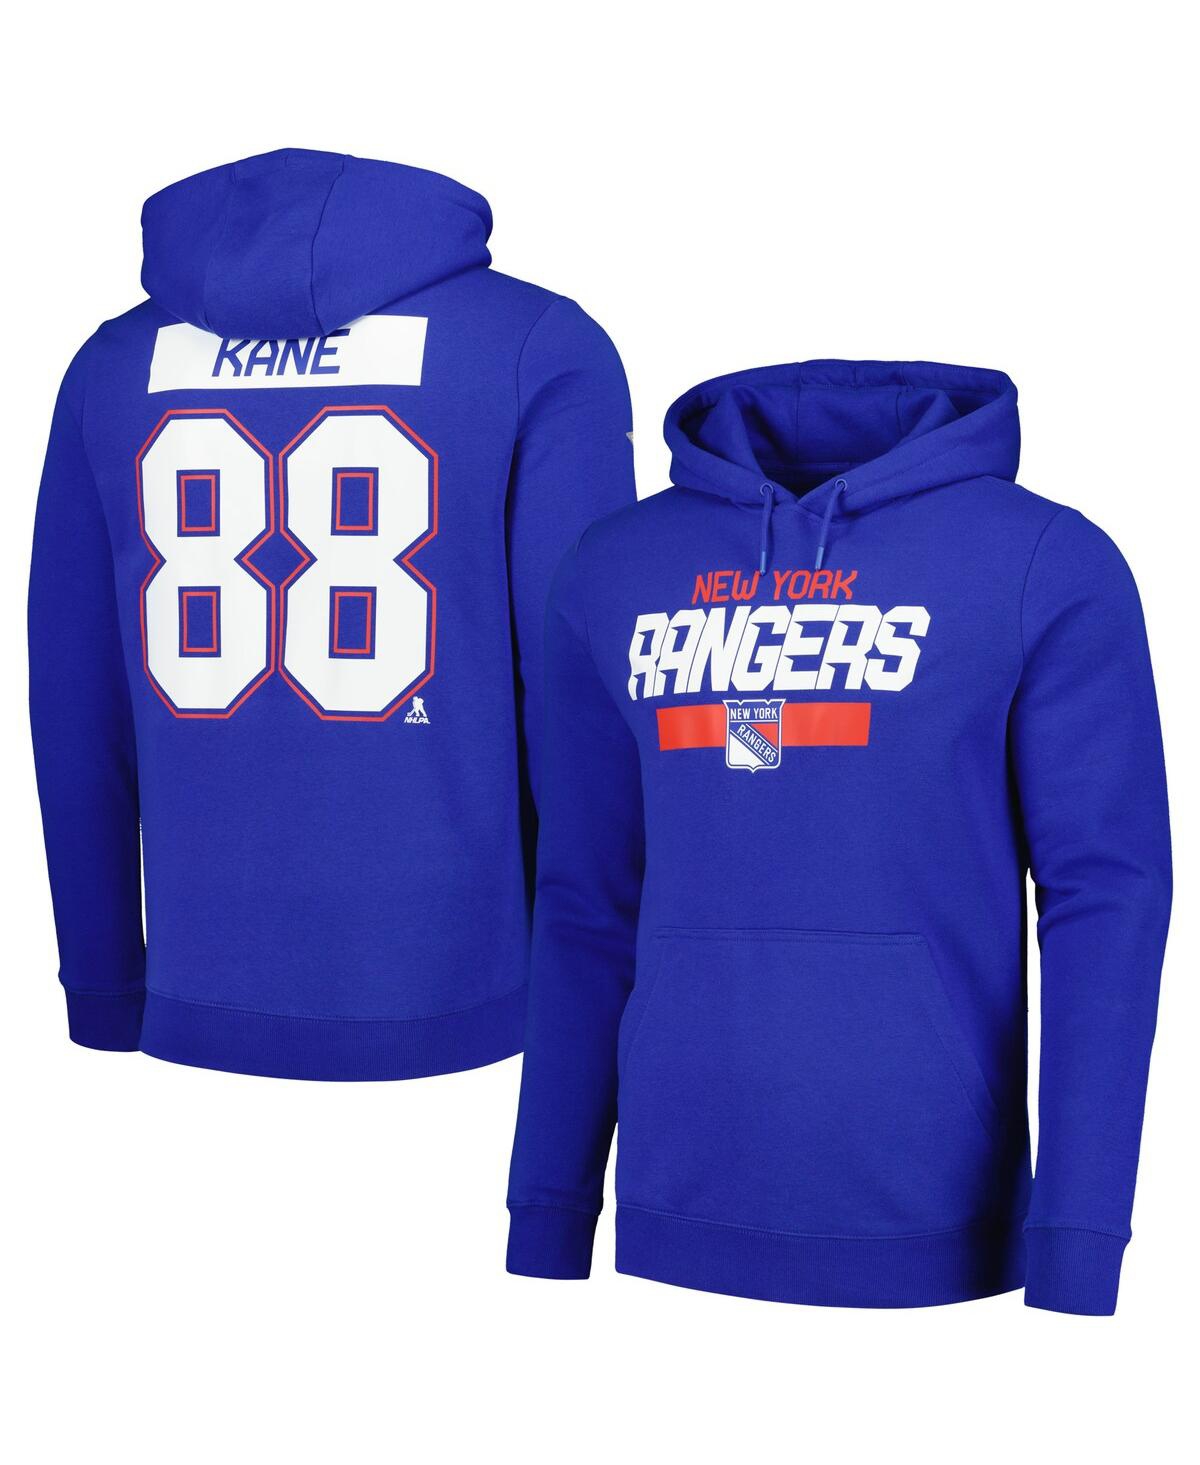 Men's LevelWear Patrick Kane Blue New York Rangers Name and Number Pullover Hoodie - Blue